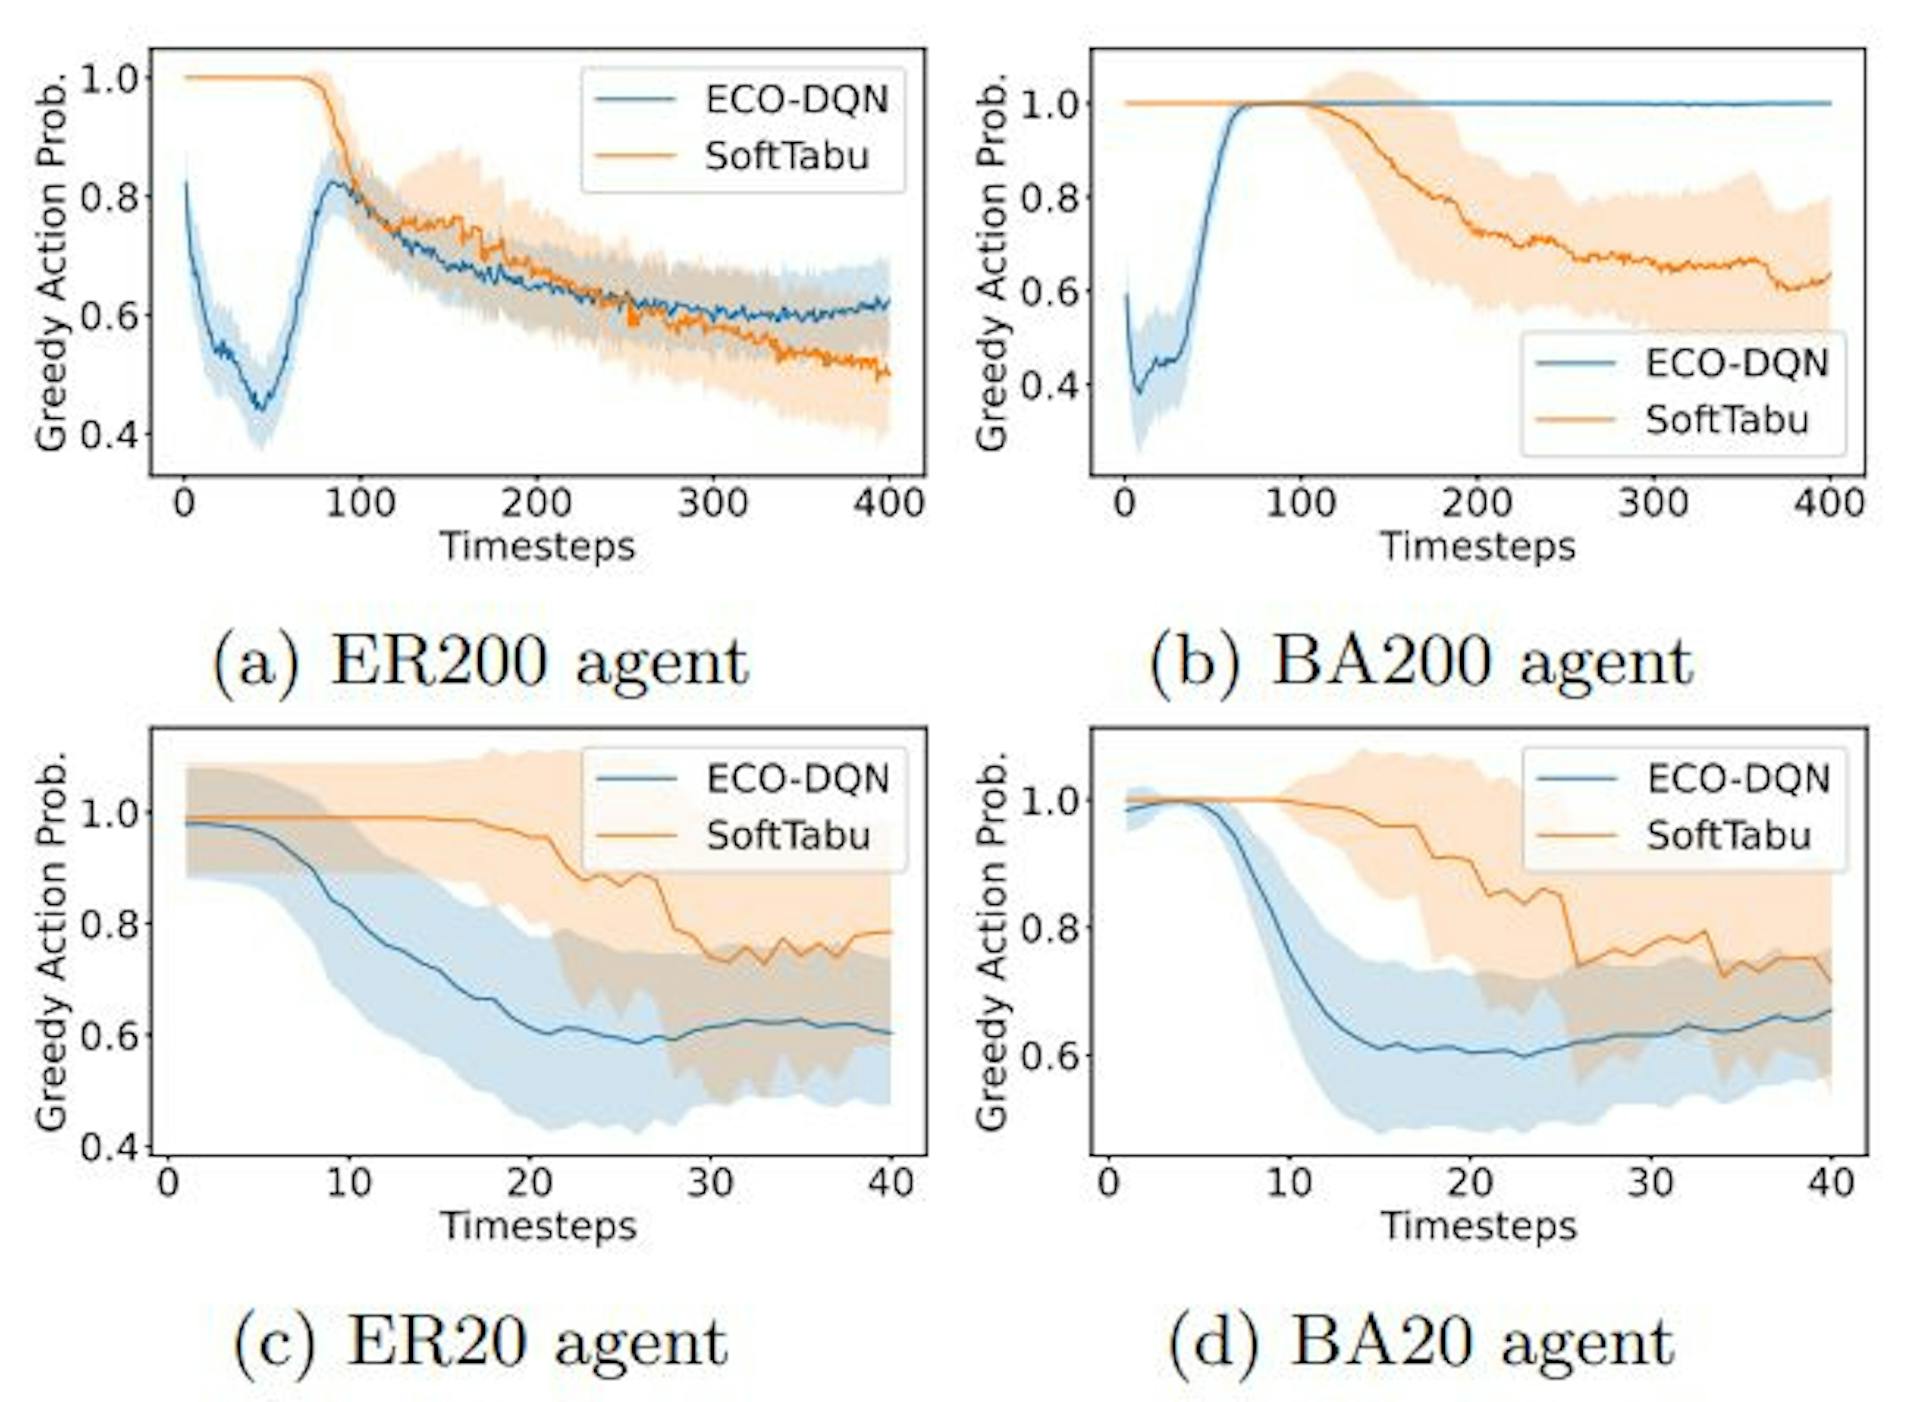 Figure 1: Intra-episode behavior of ECO-DQN and SoftTabu agents averaged across all 100 instances from the validation set for graphs with |V | = 200 and |V | = 20.